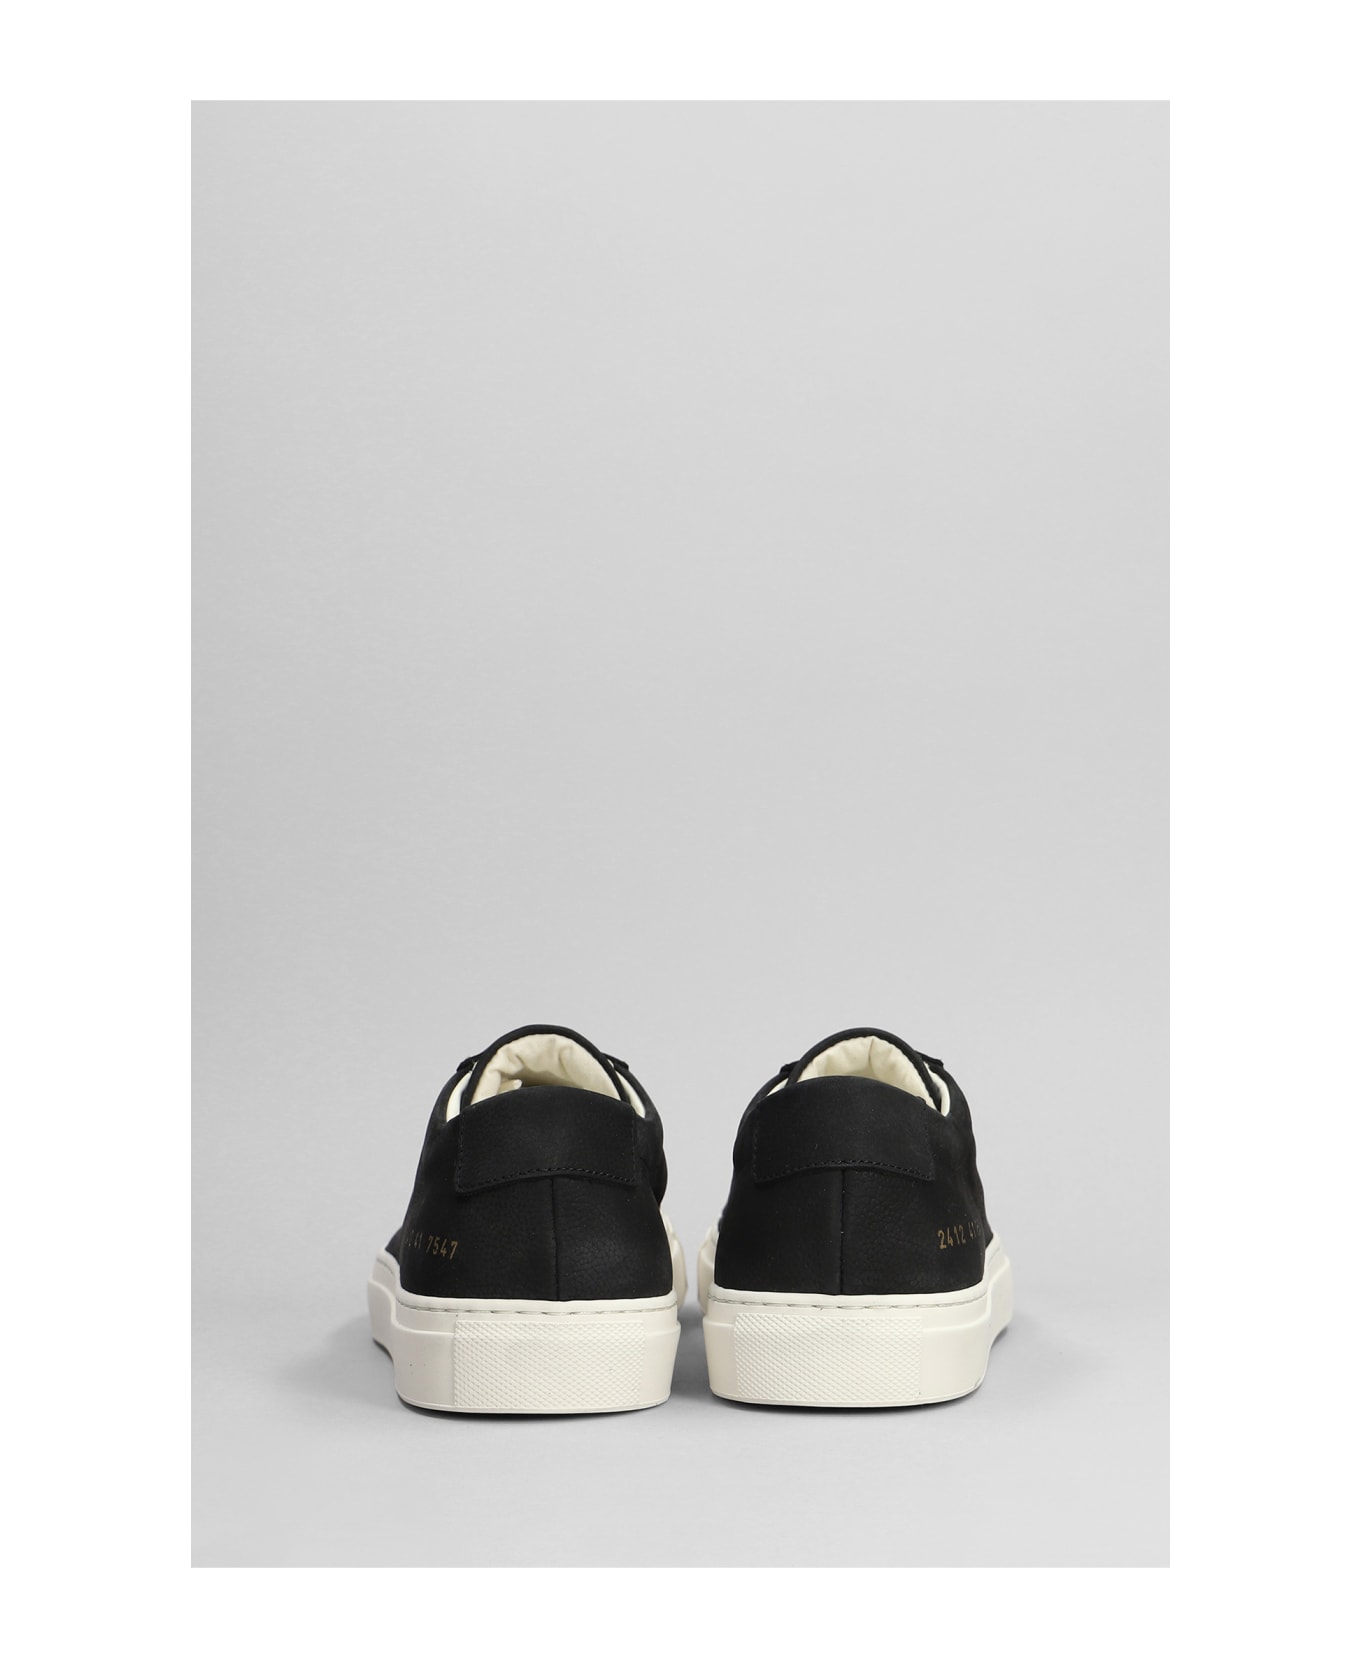 Common Projects Contrast Achilles Sneakers In Black Suede - black スニーカー